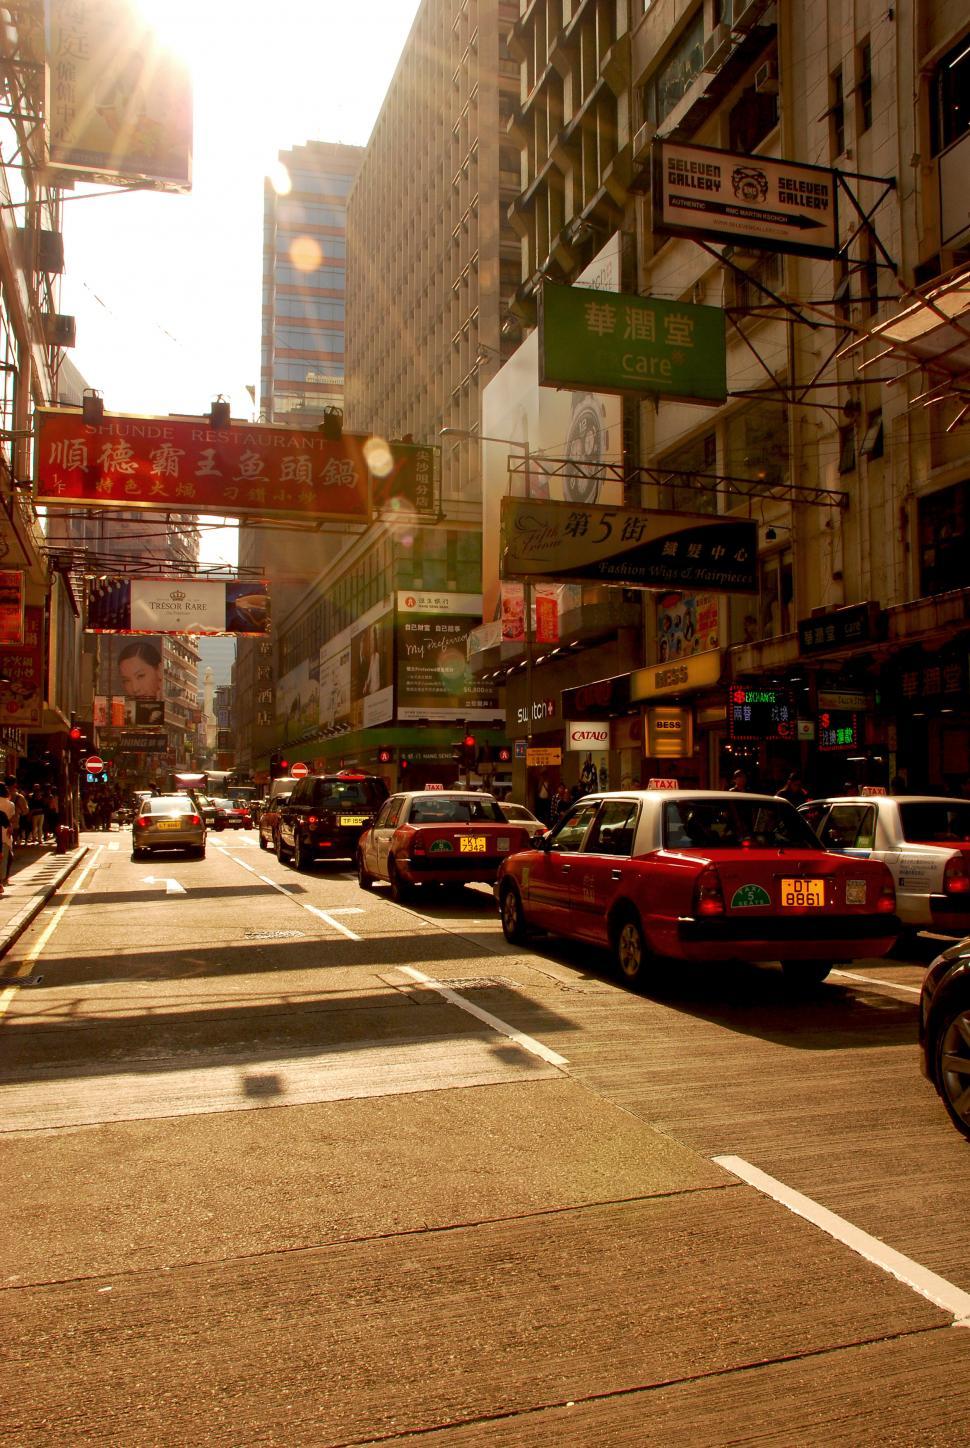 Free Image of Bustling City Street Jammed With Traffic 